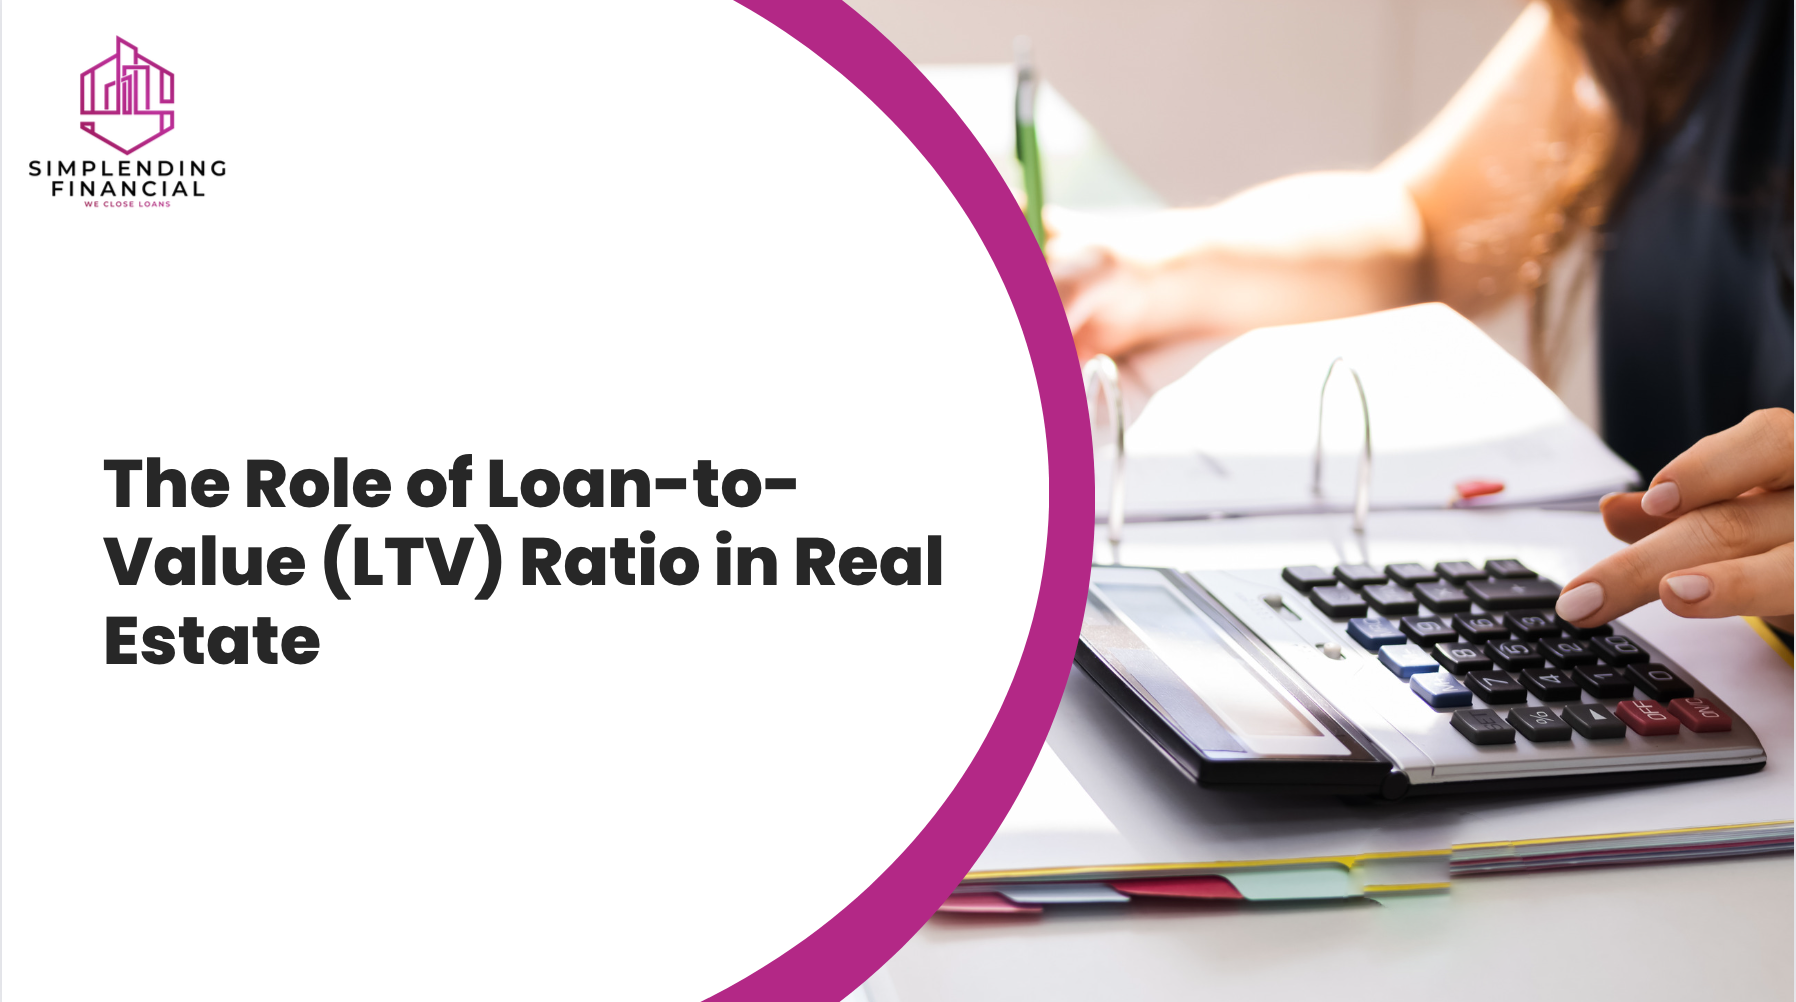 The Role of Loan-to-Value (LTV) Ratio in Real Estate